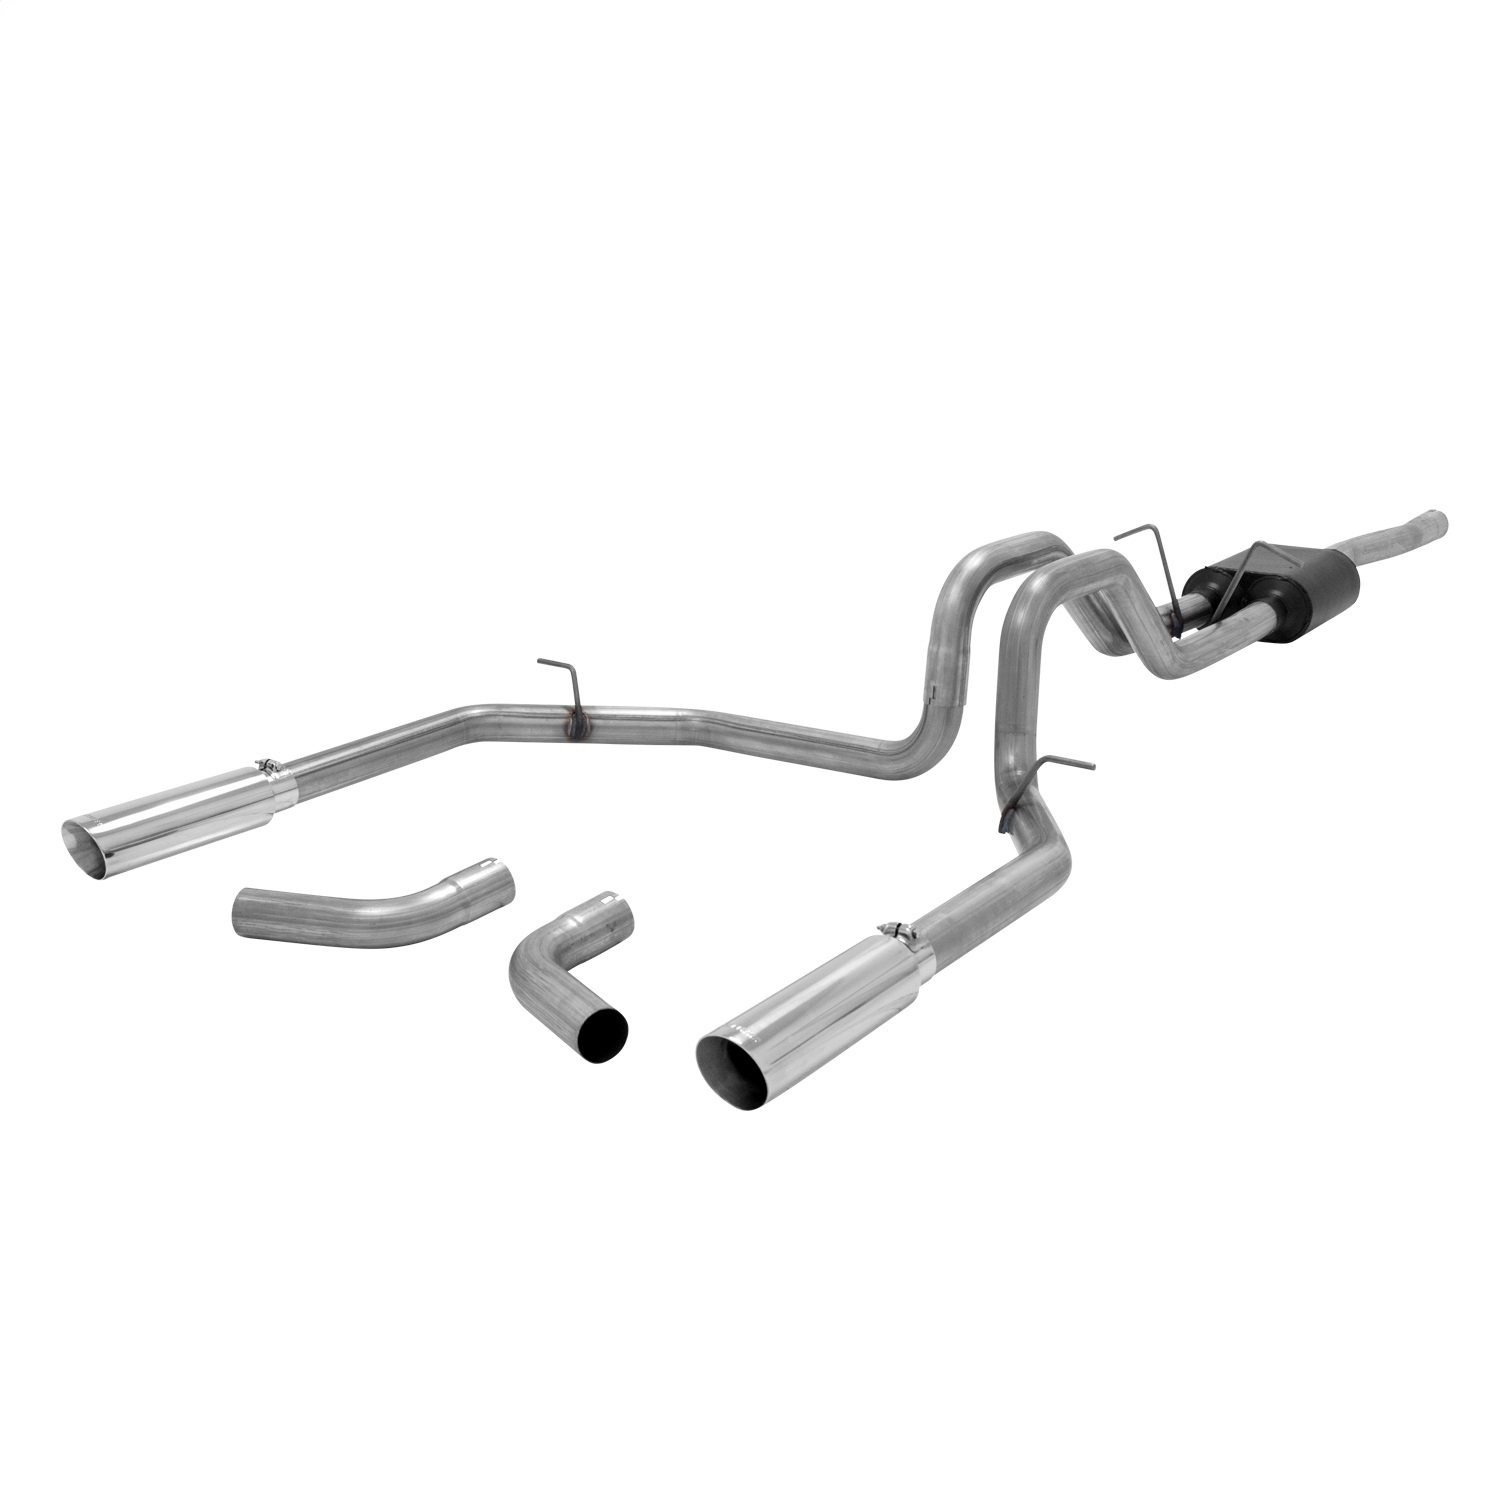 Flowmaster Flowmaster 817663 American Thunder Cat Back Exhaust System Fits 98-03 F-150